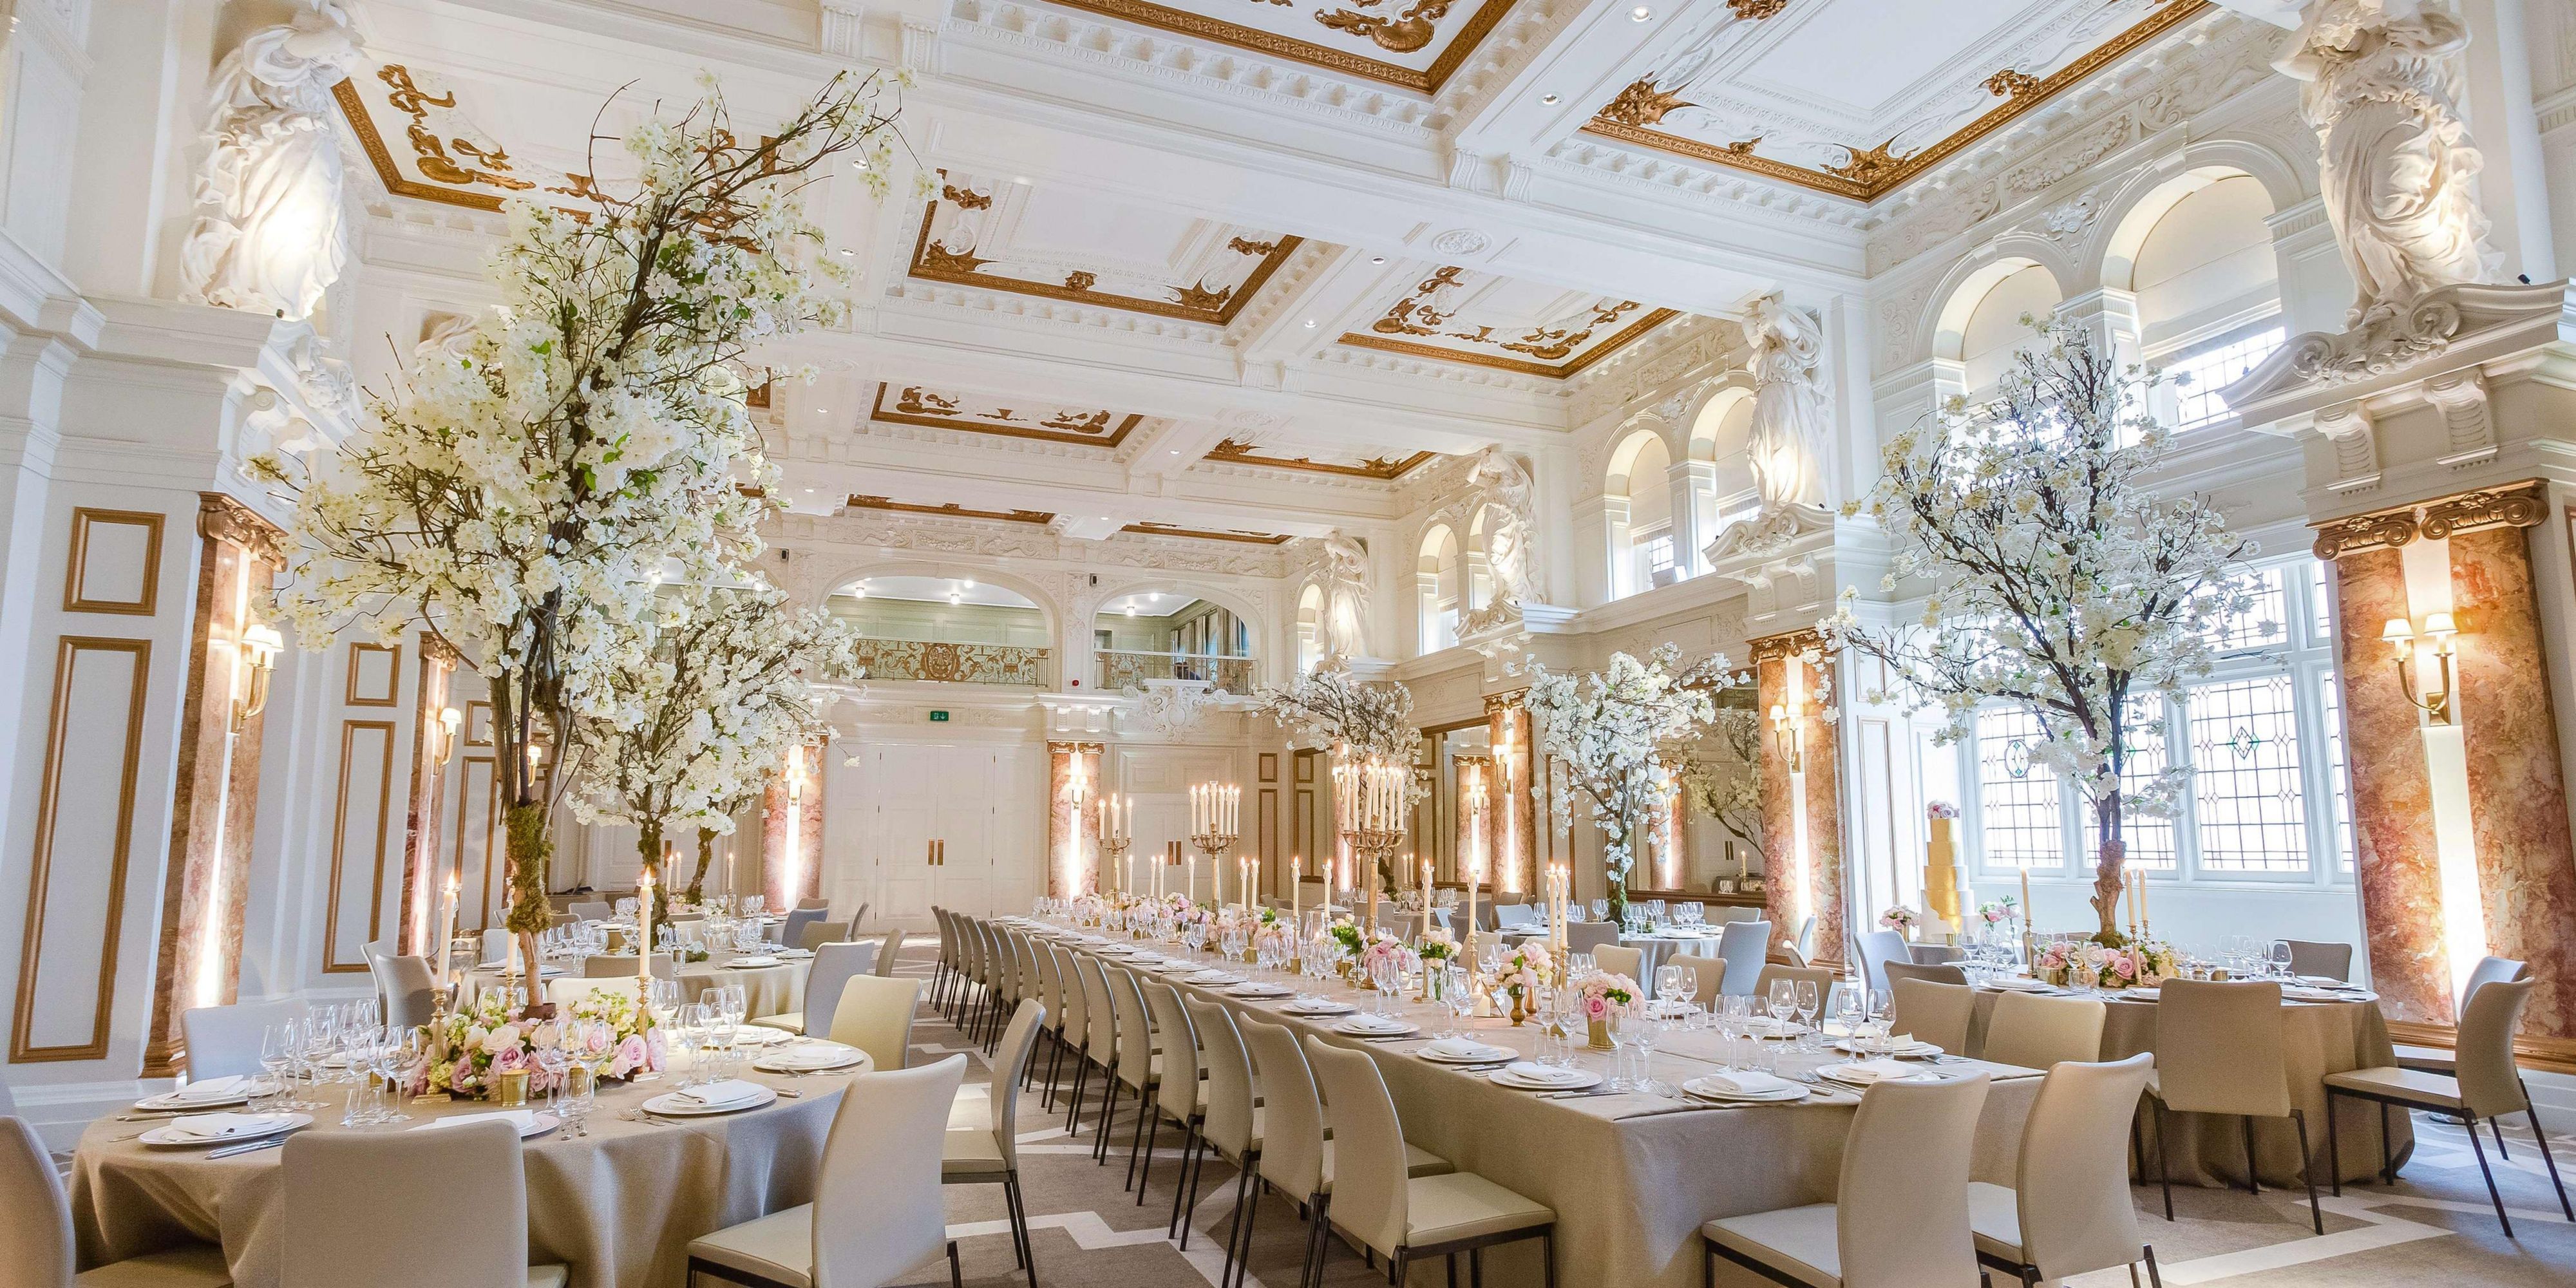 Whether you're looking to host a large bash in a ballroom or a more intimate affair, Kimpton Fitzroy London's beautifully restored event spaces will help you say "I Do" in style. We’ll gamely coordinate every aspect of planning, from food to flowers to every detail in between.